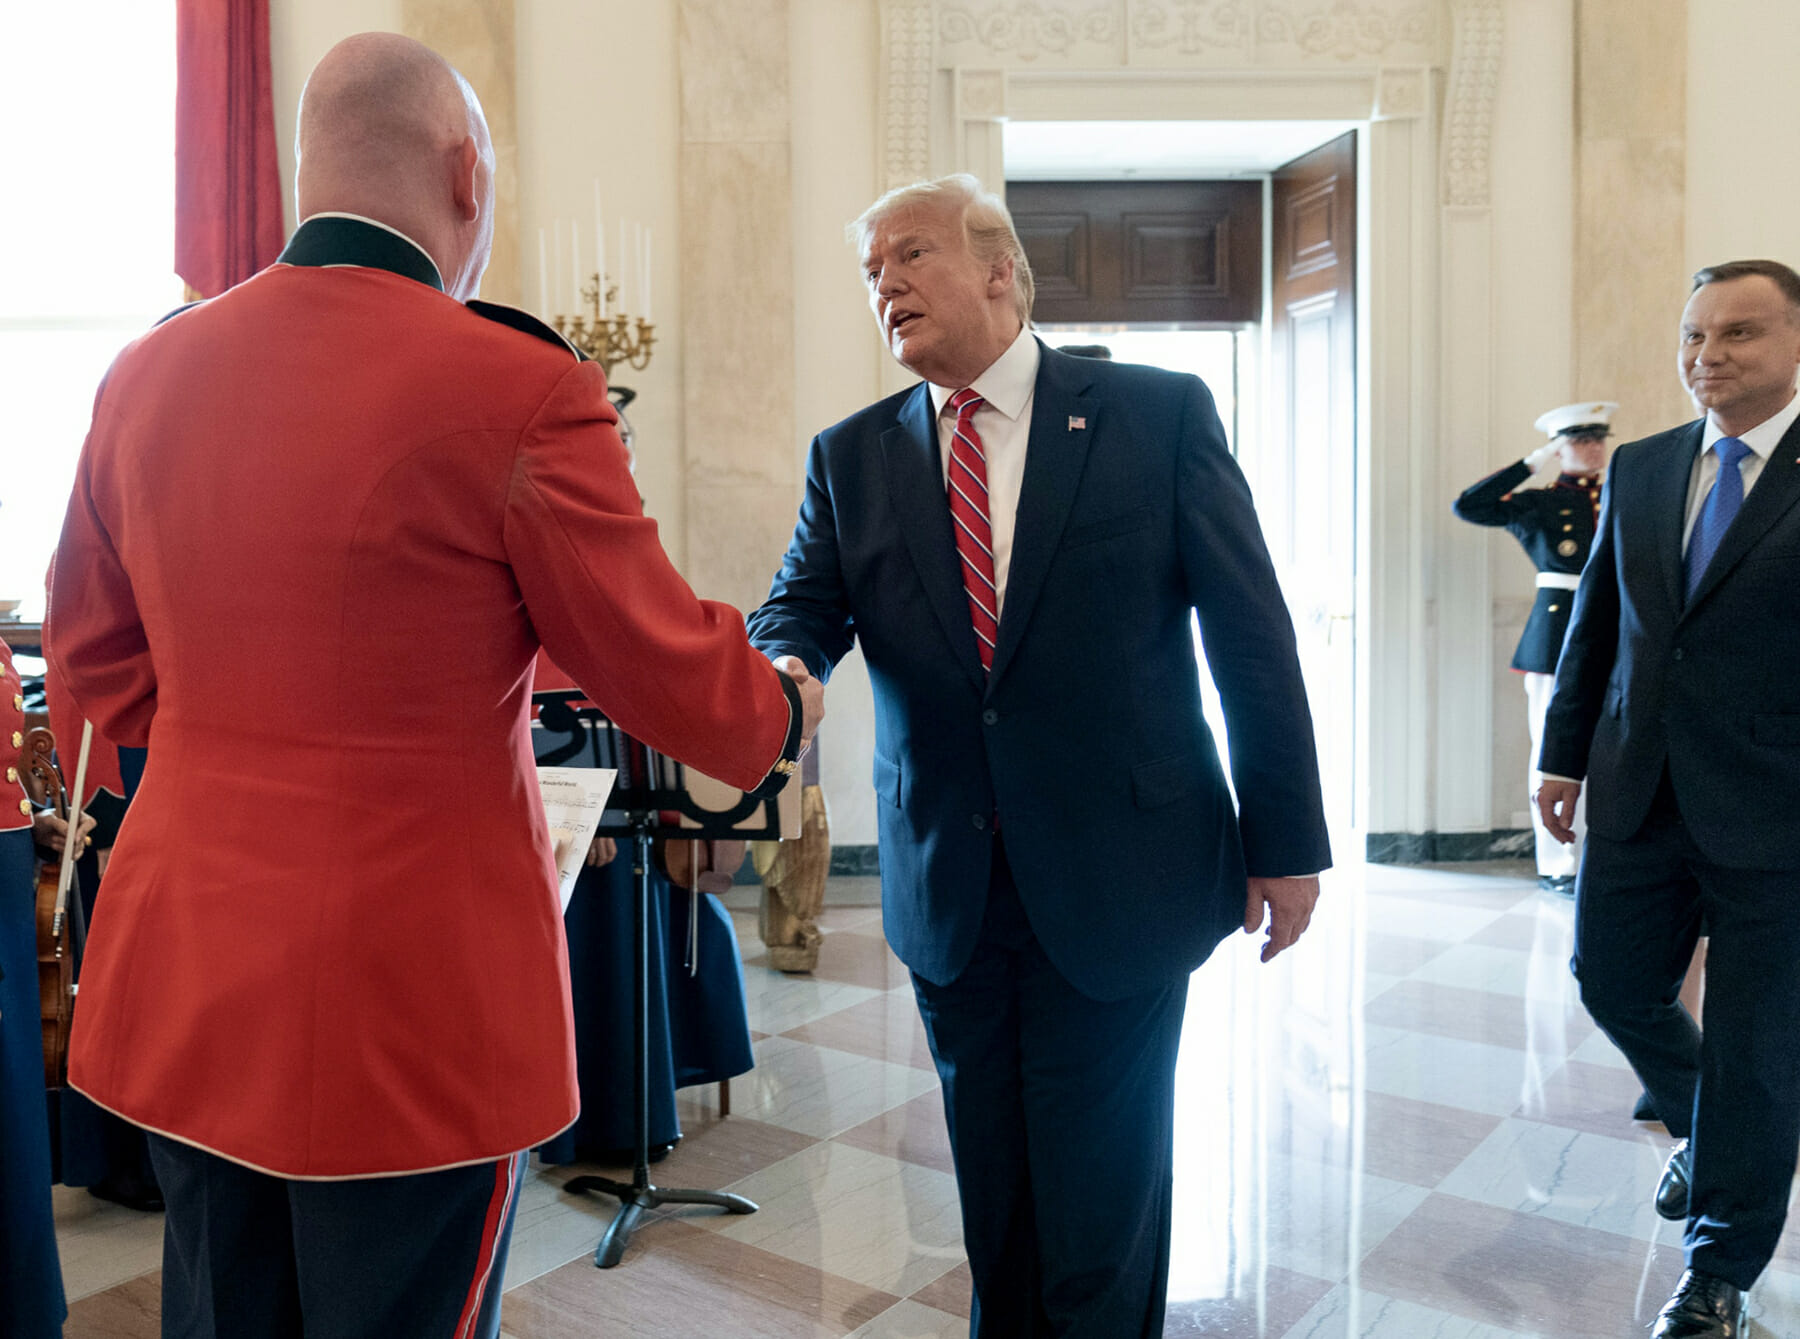 Peter Wilson shakes hands with president Donald Trump in the White House